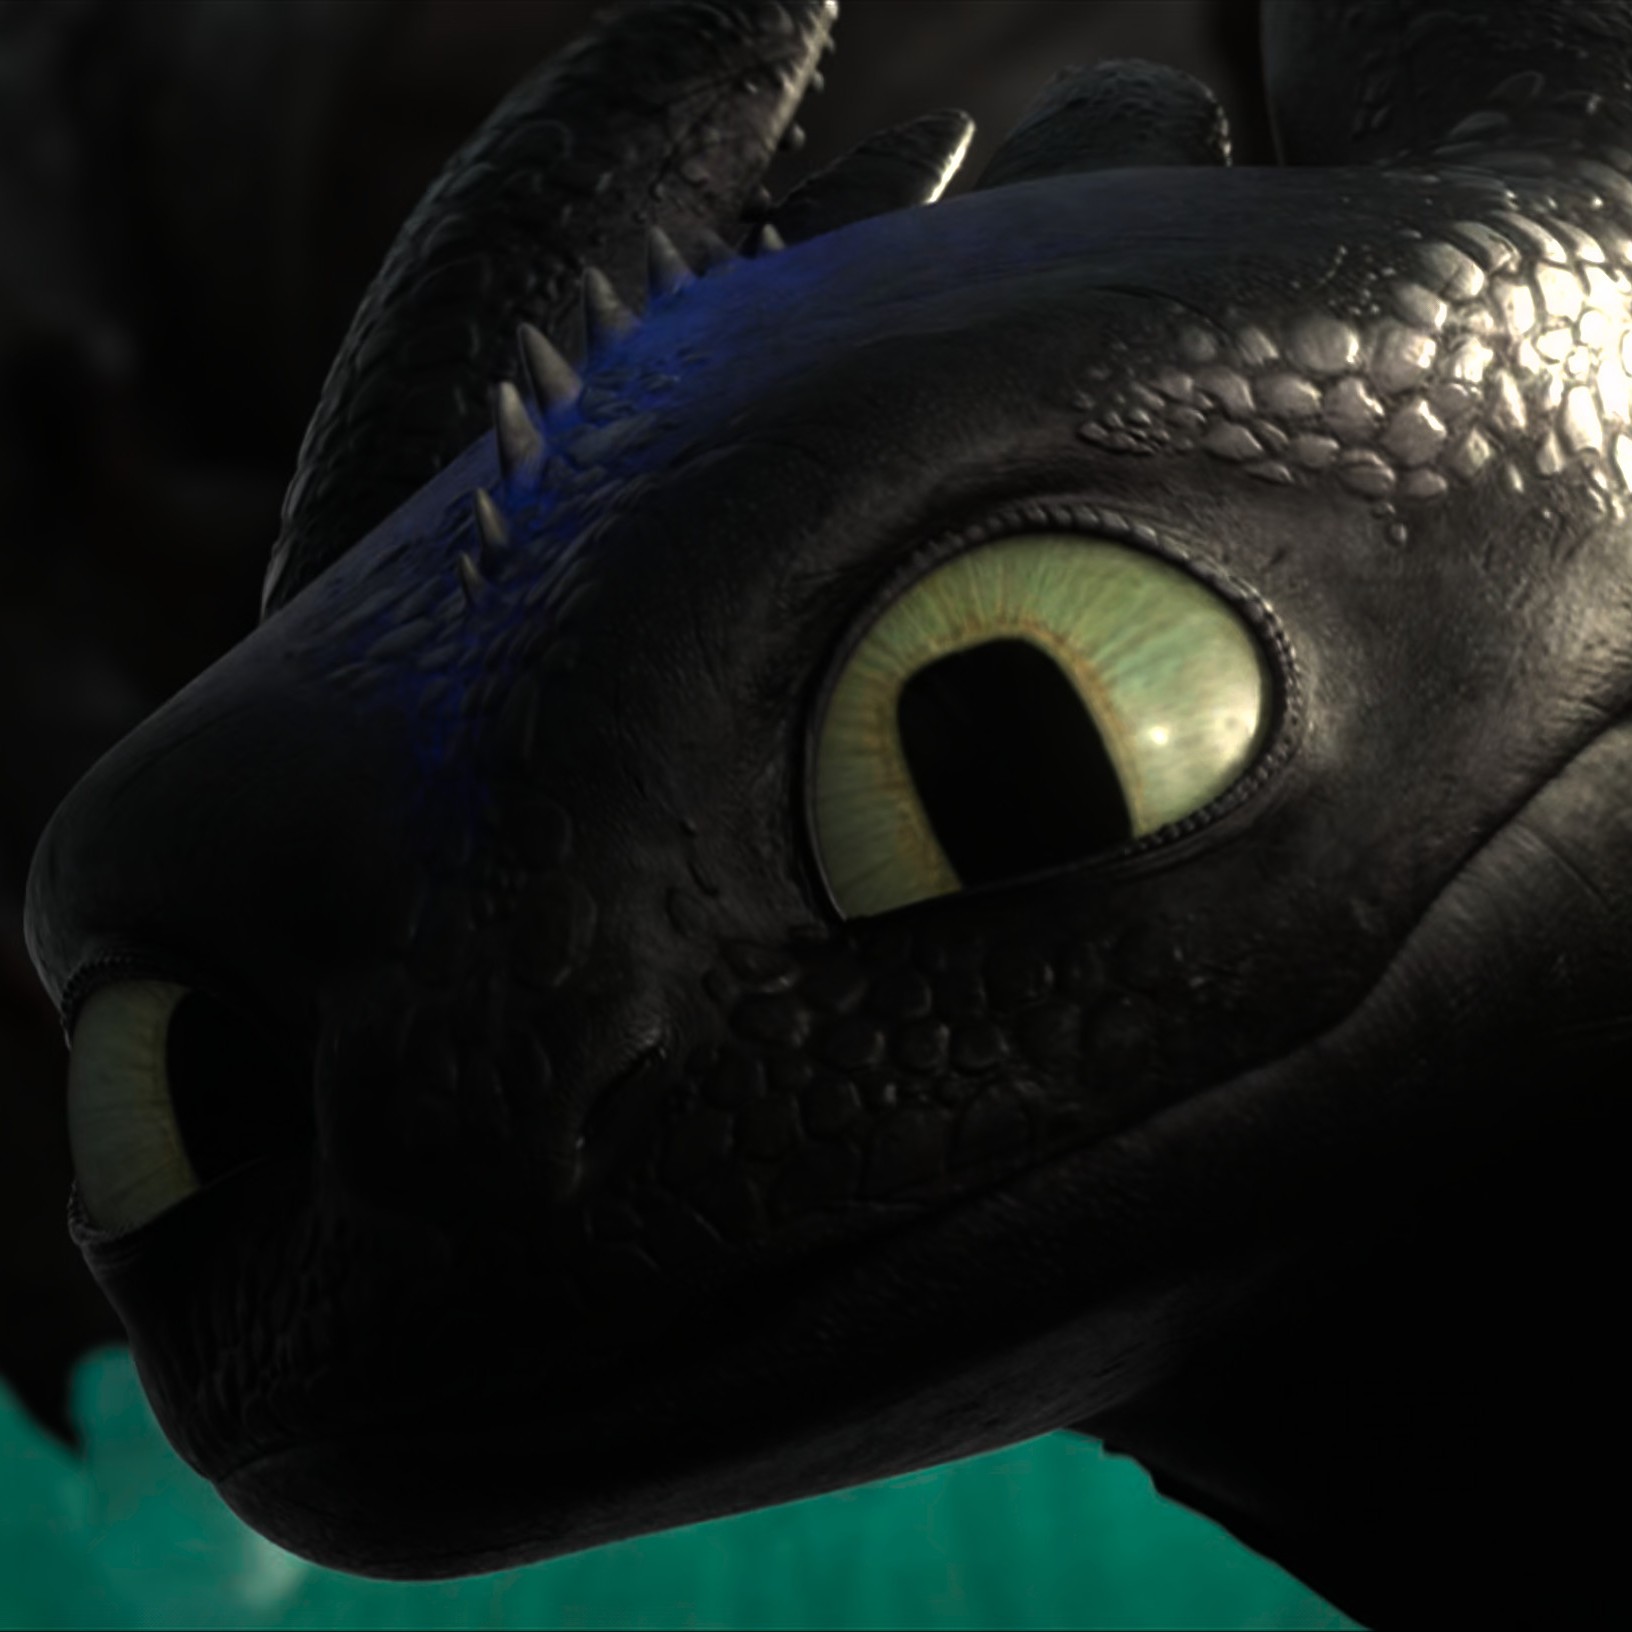 Toothless pic n°19